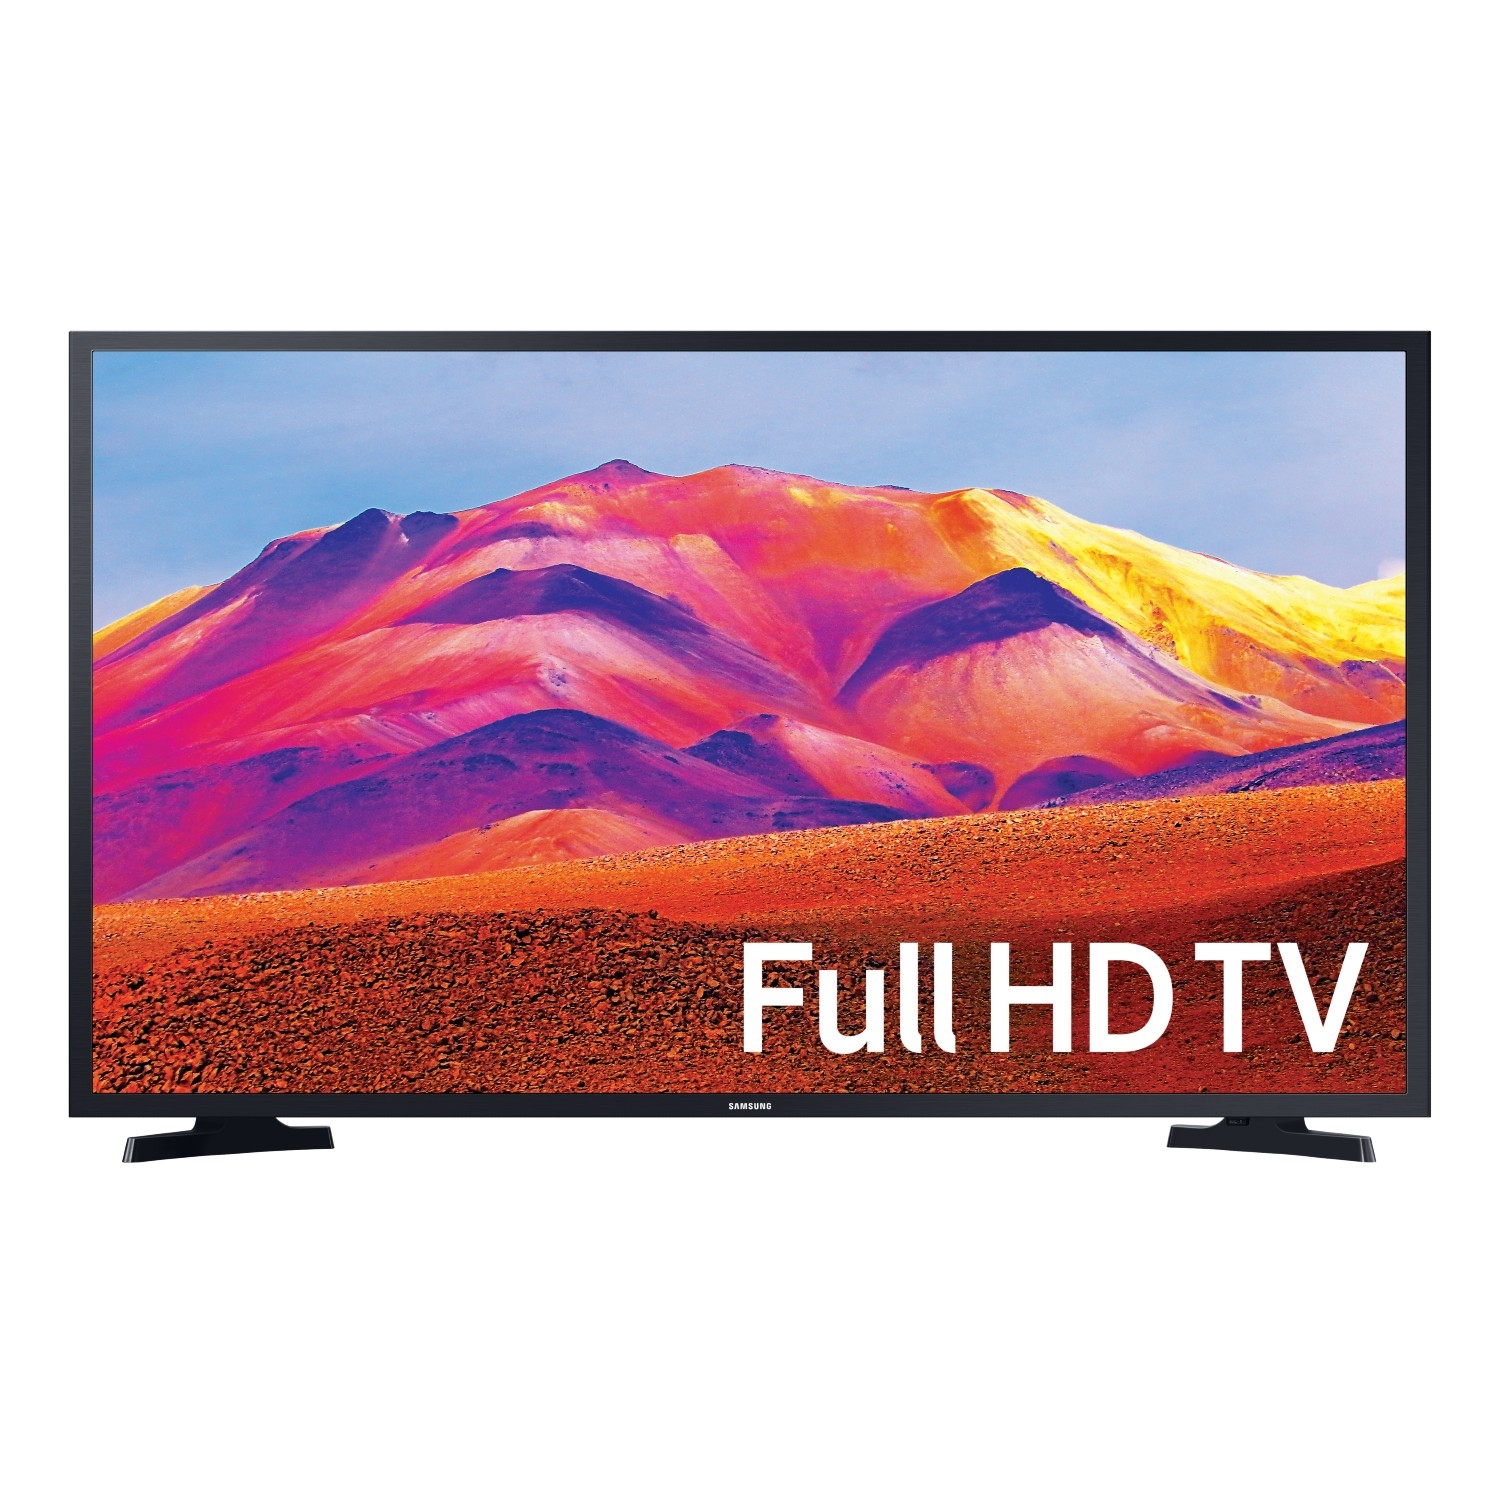 Samsung UE32T5300CKXXU 32" Full HD HDR Smart TV with PurColour and Contrast Enhancer - 0